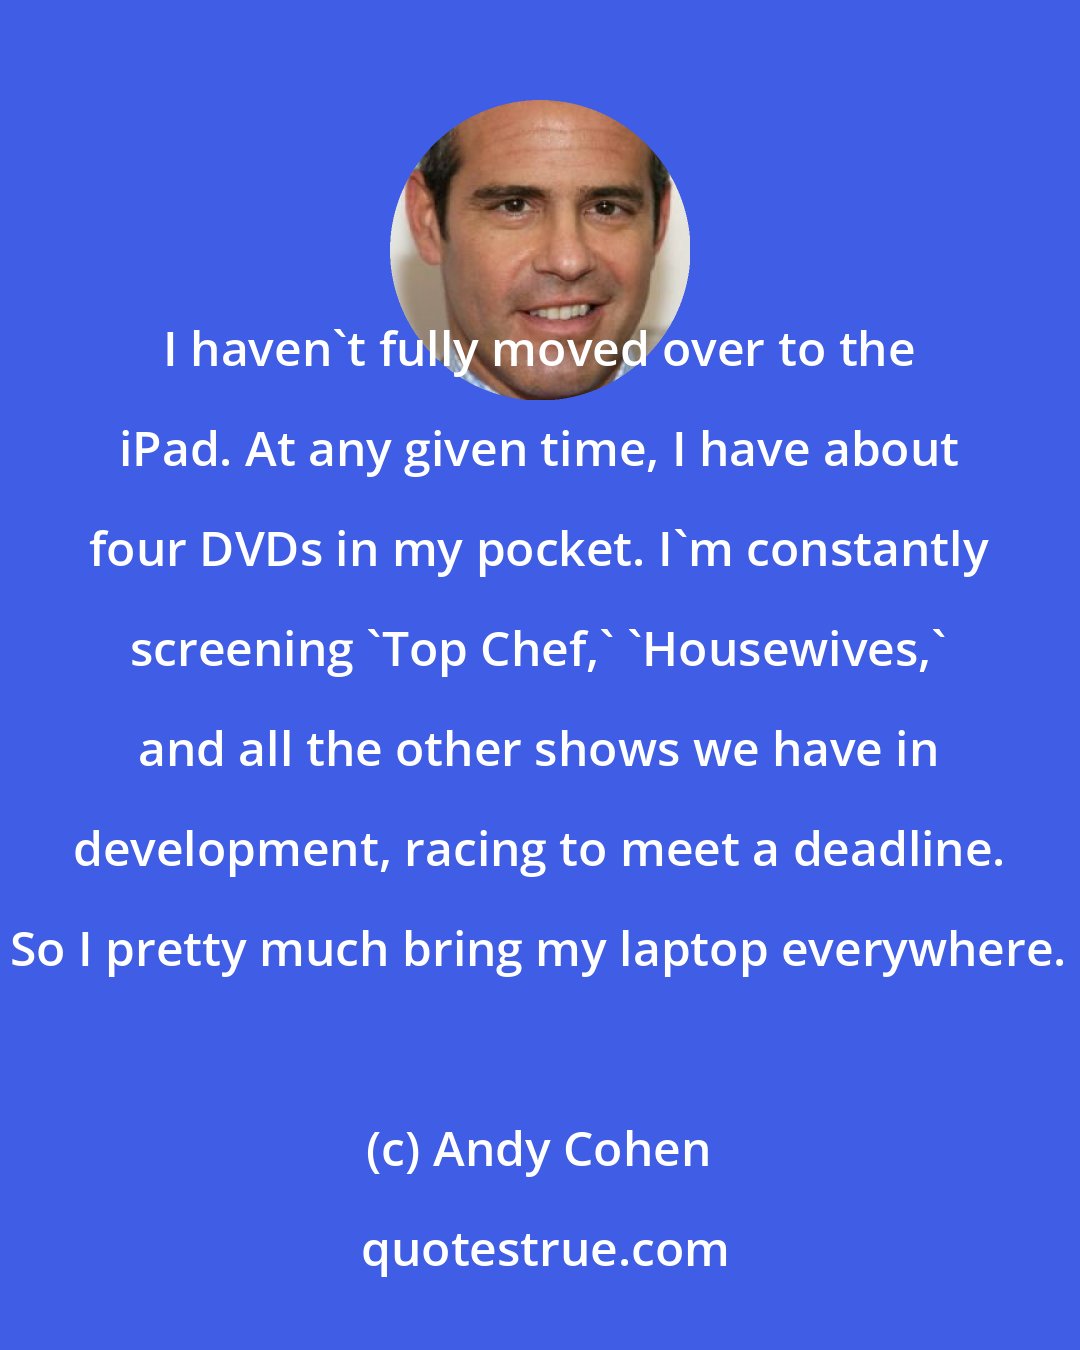 Andy Cohen: I haven't fully moved over to the iPad. At any given time, I have about four DVDs in my pocket. I'm constantly screening 'Top Chef,' 'Housewives,' and all the other shows we have in development, racing to meet a deadline. So I pretty much bring my laptop everywhere.